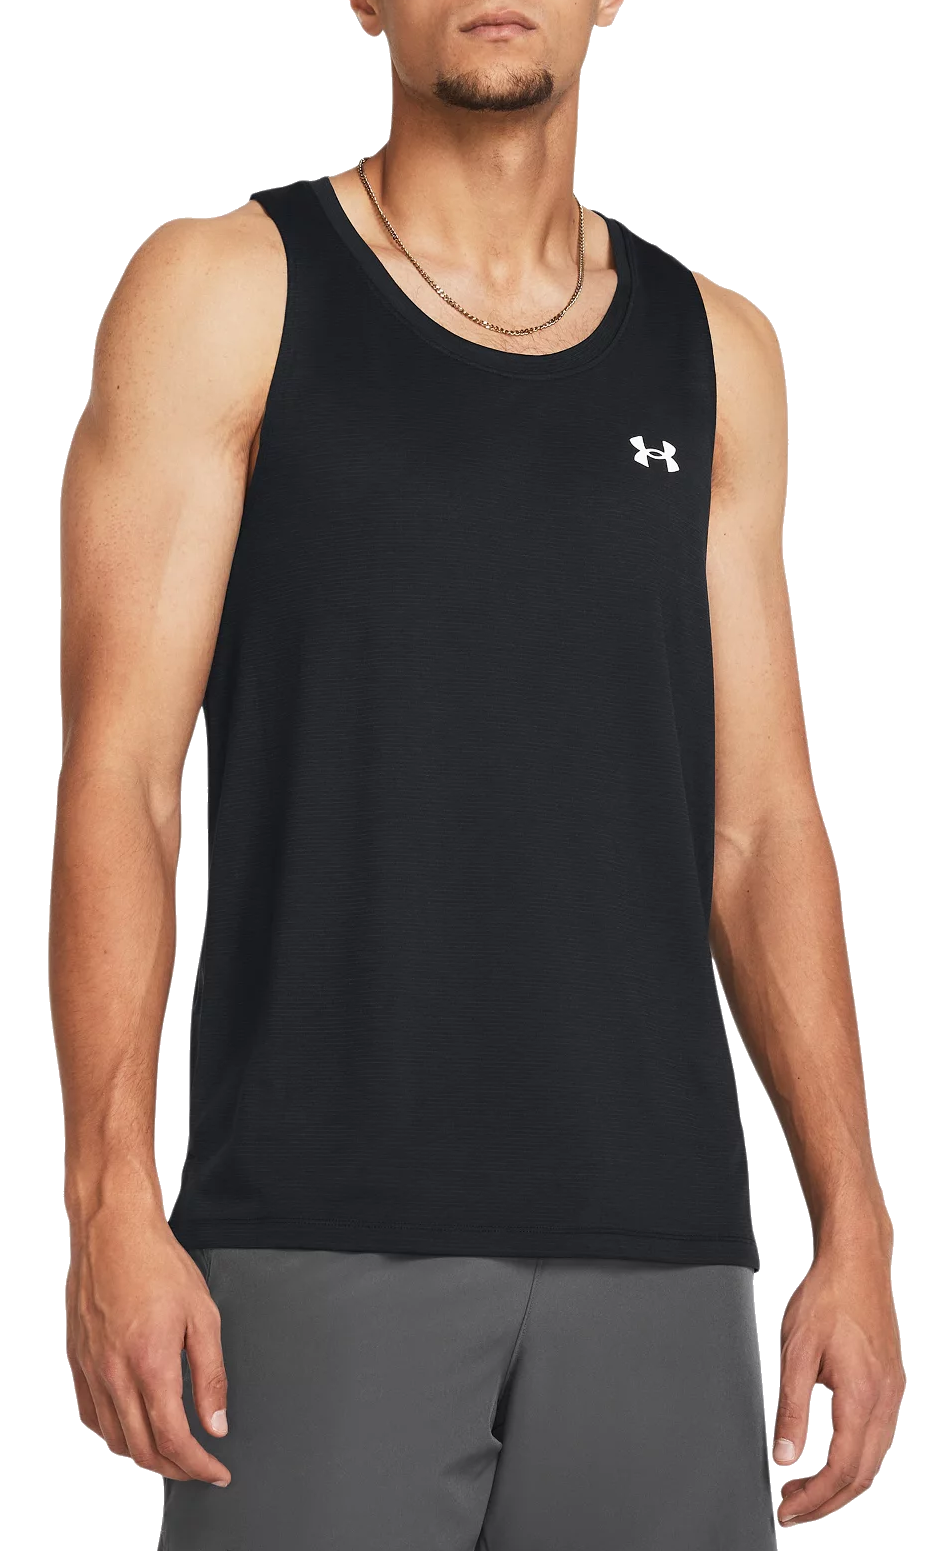 Under Armour Launch Singlet